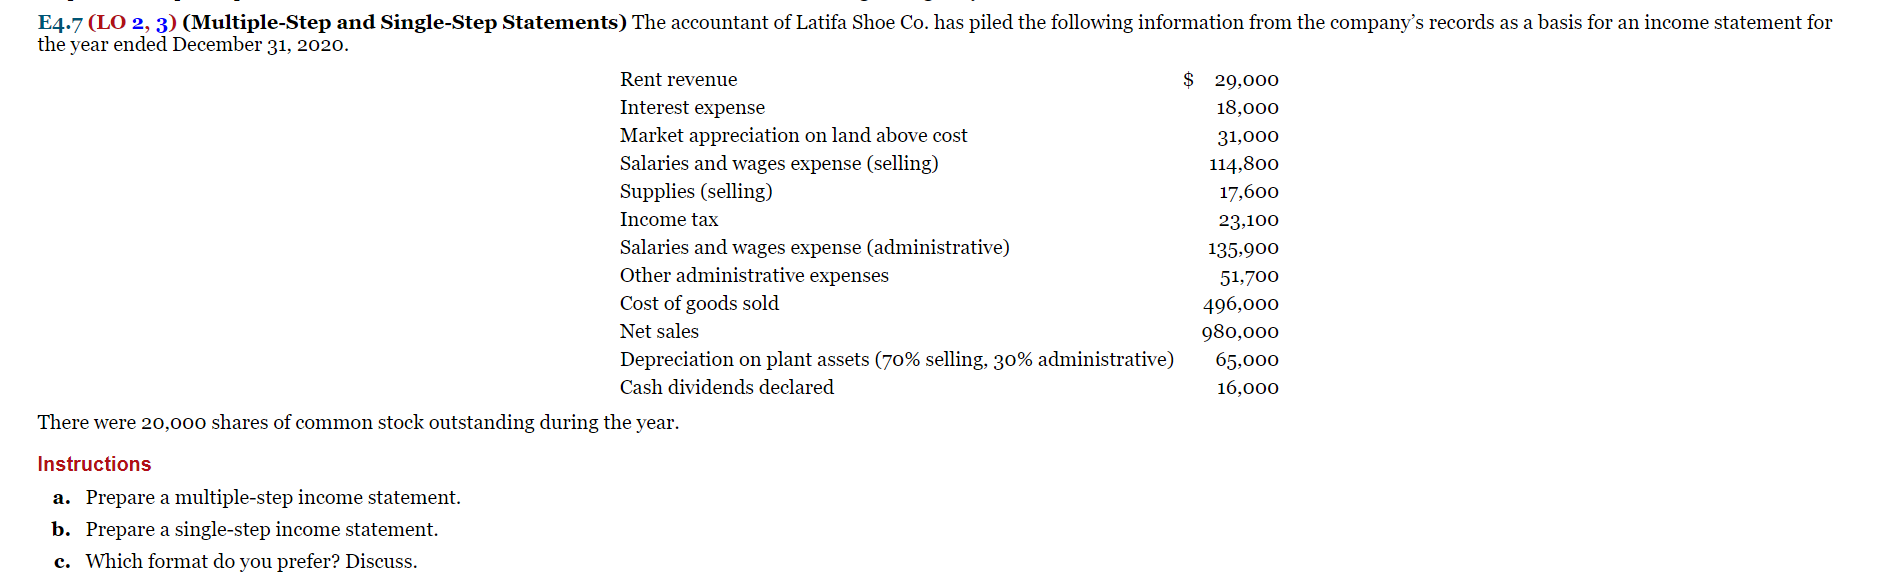 E4.7 (LO 2, 3) (Multiple-Step and Single-Step Statements) The accountant of Latifa Shoe Co. has piled the following information from the company's records as a basis for an income statement for
the year ended December 31, 2020.
Rent revenue
$ 29,000
Interest expense
18,000
Market appreciation on land above cost
Salaries and wages expense (selling)
31,000
114,800
Supplies (selling)
17,600
Income tax
23,100
Salaries and wages expense (administrative)
Other administrative expenses
135,900
51,700
Cost of goods sold
496,000
980,000
Net sales
Depreciation on plant assets (70% selling, 30% administrative)
Cash dividends declared
65,000
16,000
There were 20,000 shares of common stock outstanding during the year.
Instructions
a. Prepare a multiple-step income statement.
b. Prepare a single-step income statement.
c. Which format do you prefer? Discuss.
